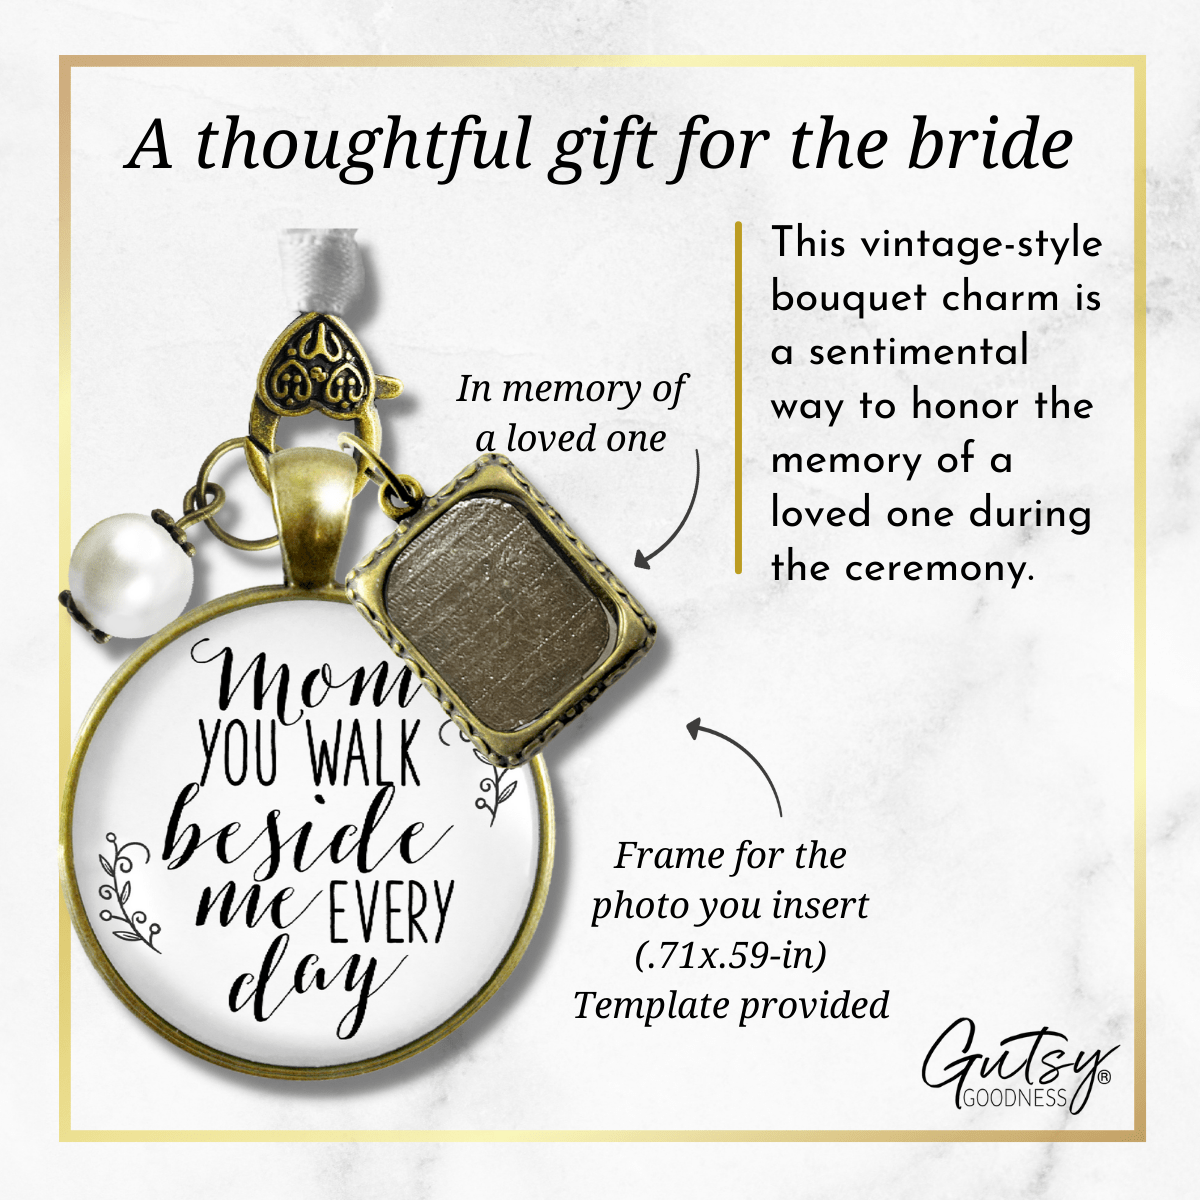 Wedding Bouquet Photo Charm Mom Beside Me White Bridal Mother Memorial Picture Jewel - Gutsy Goodness Handmade Jewelry Gifts